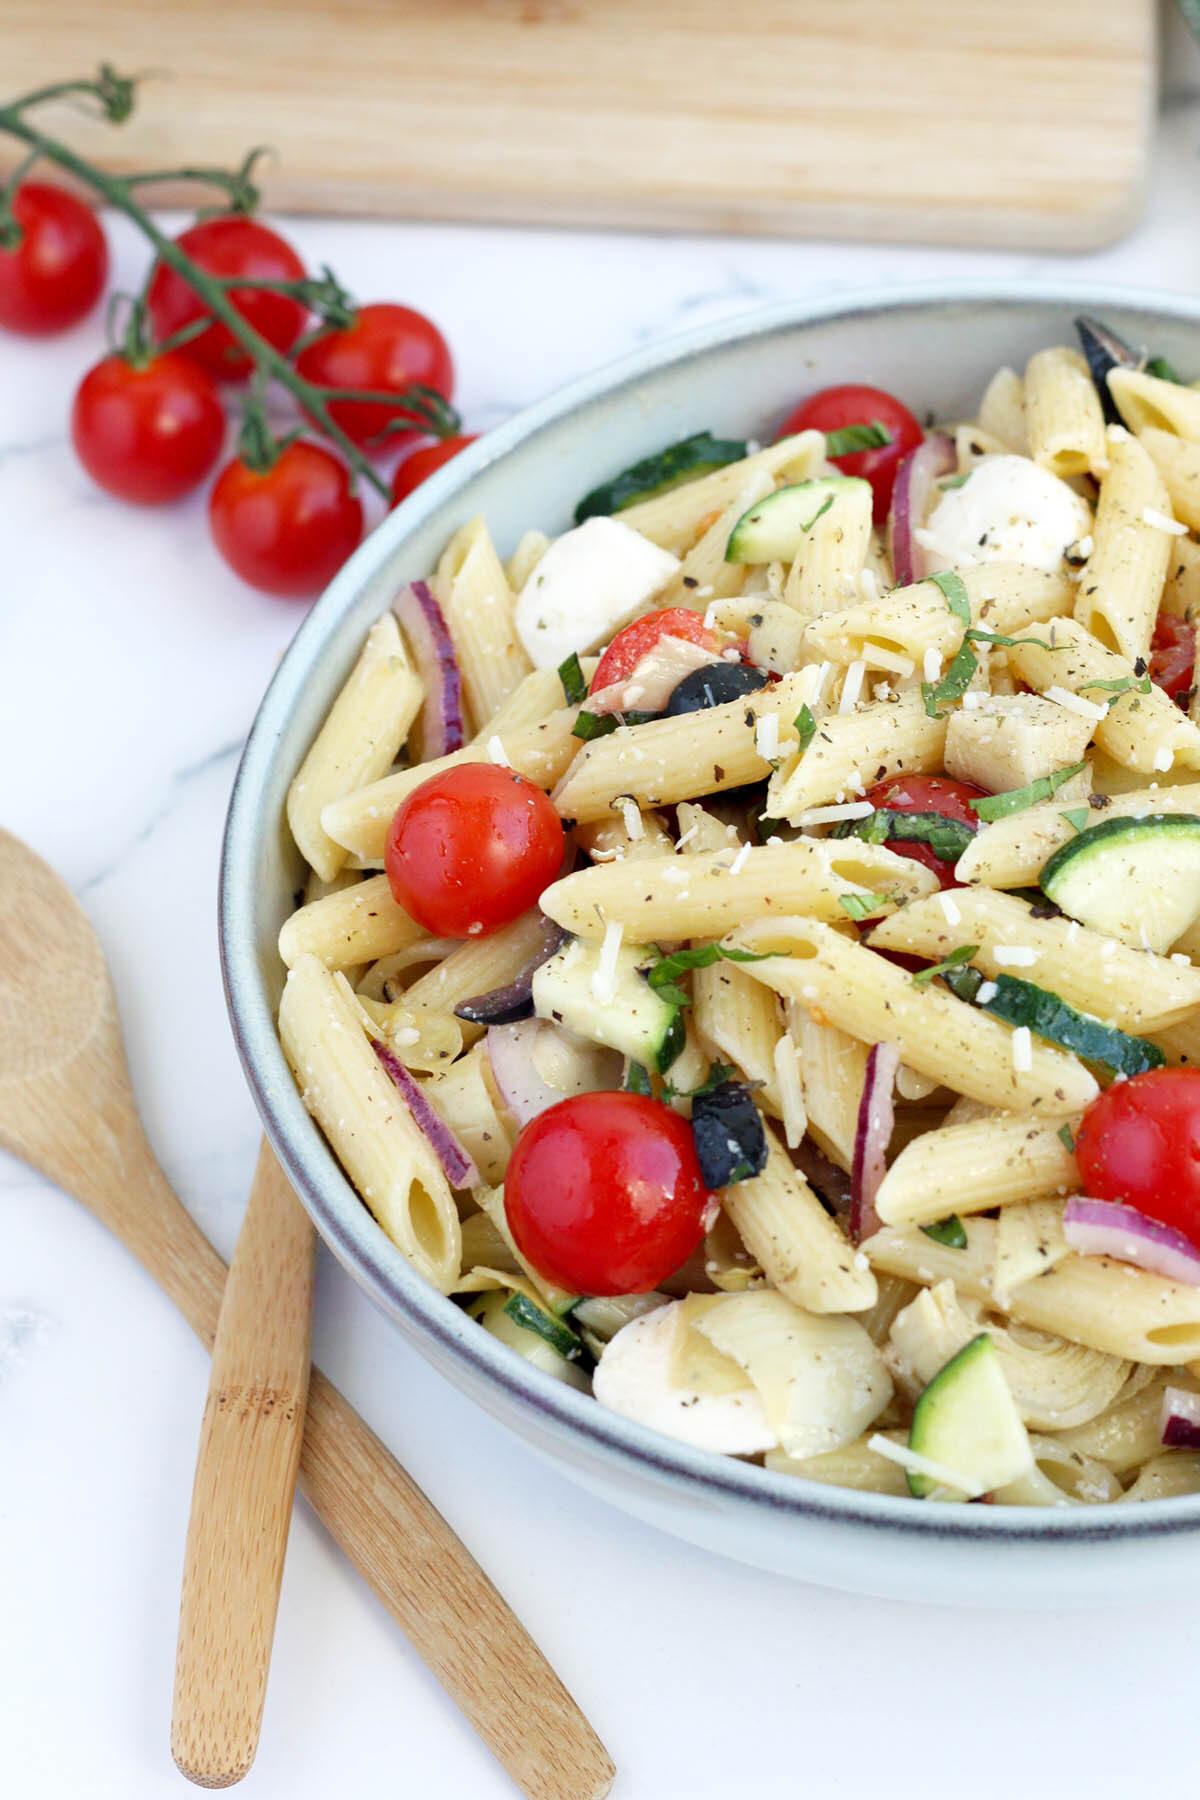 italian pasta salad with tomatoes and zucchini in a serving bowl with wooden utensils